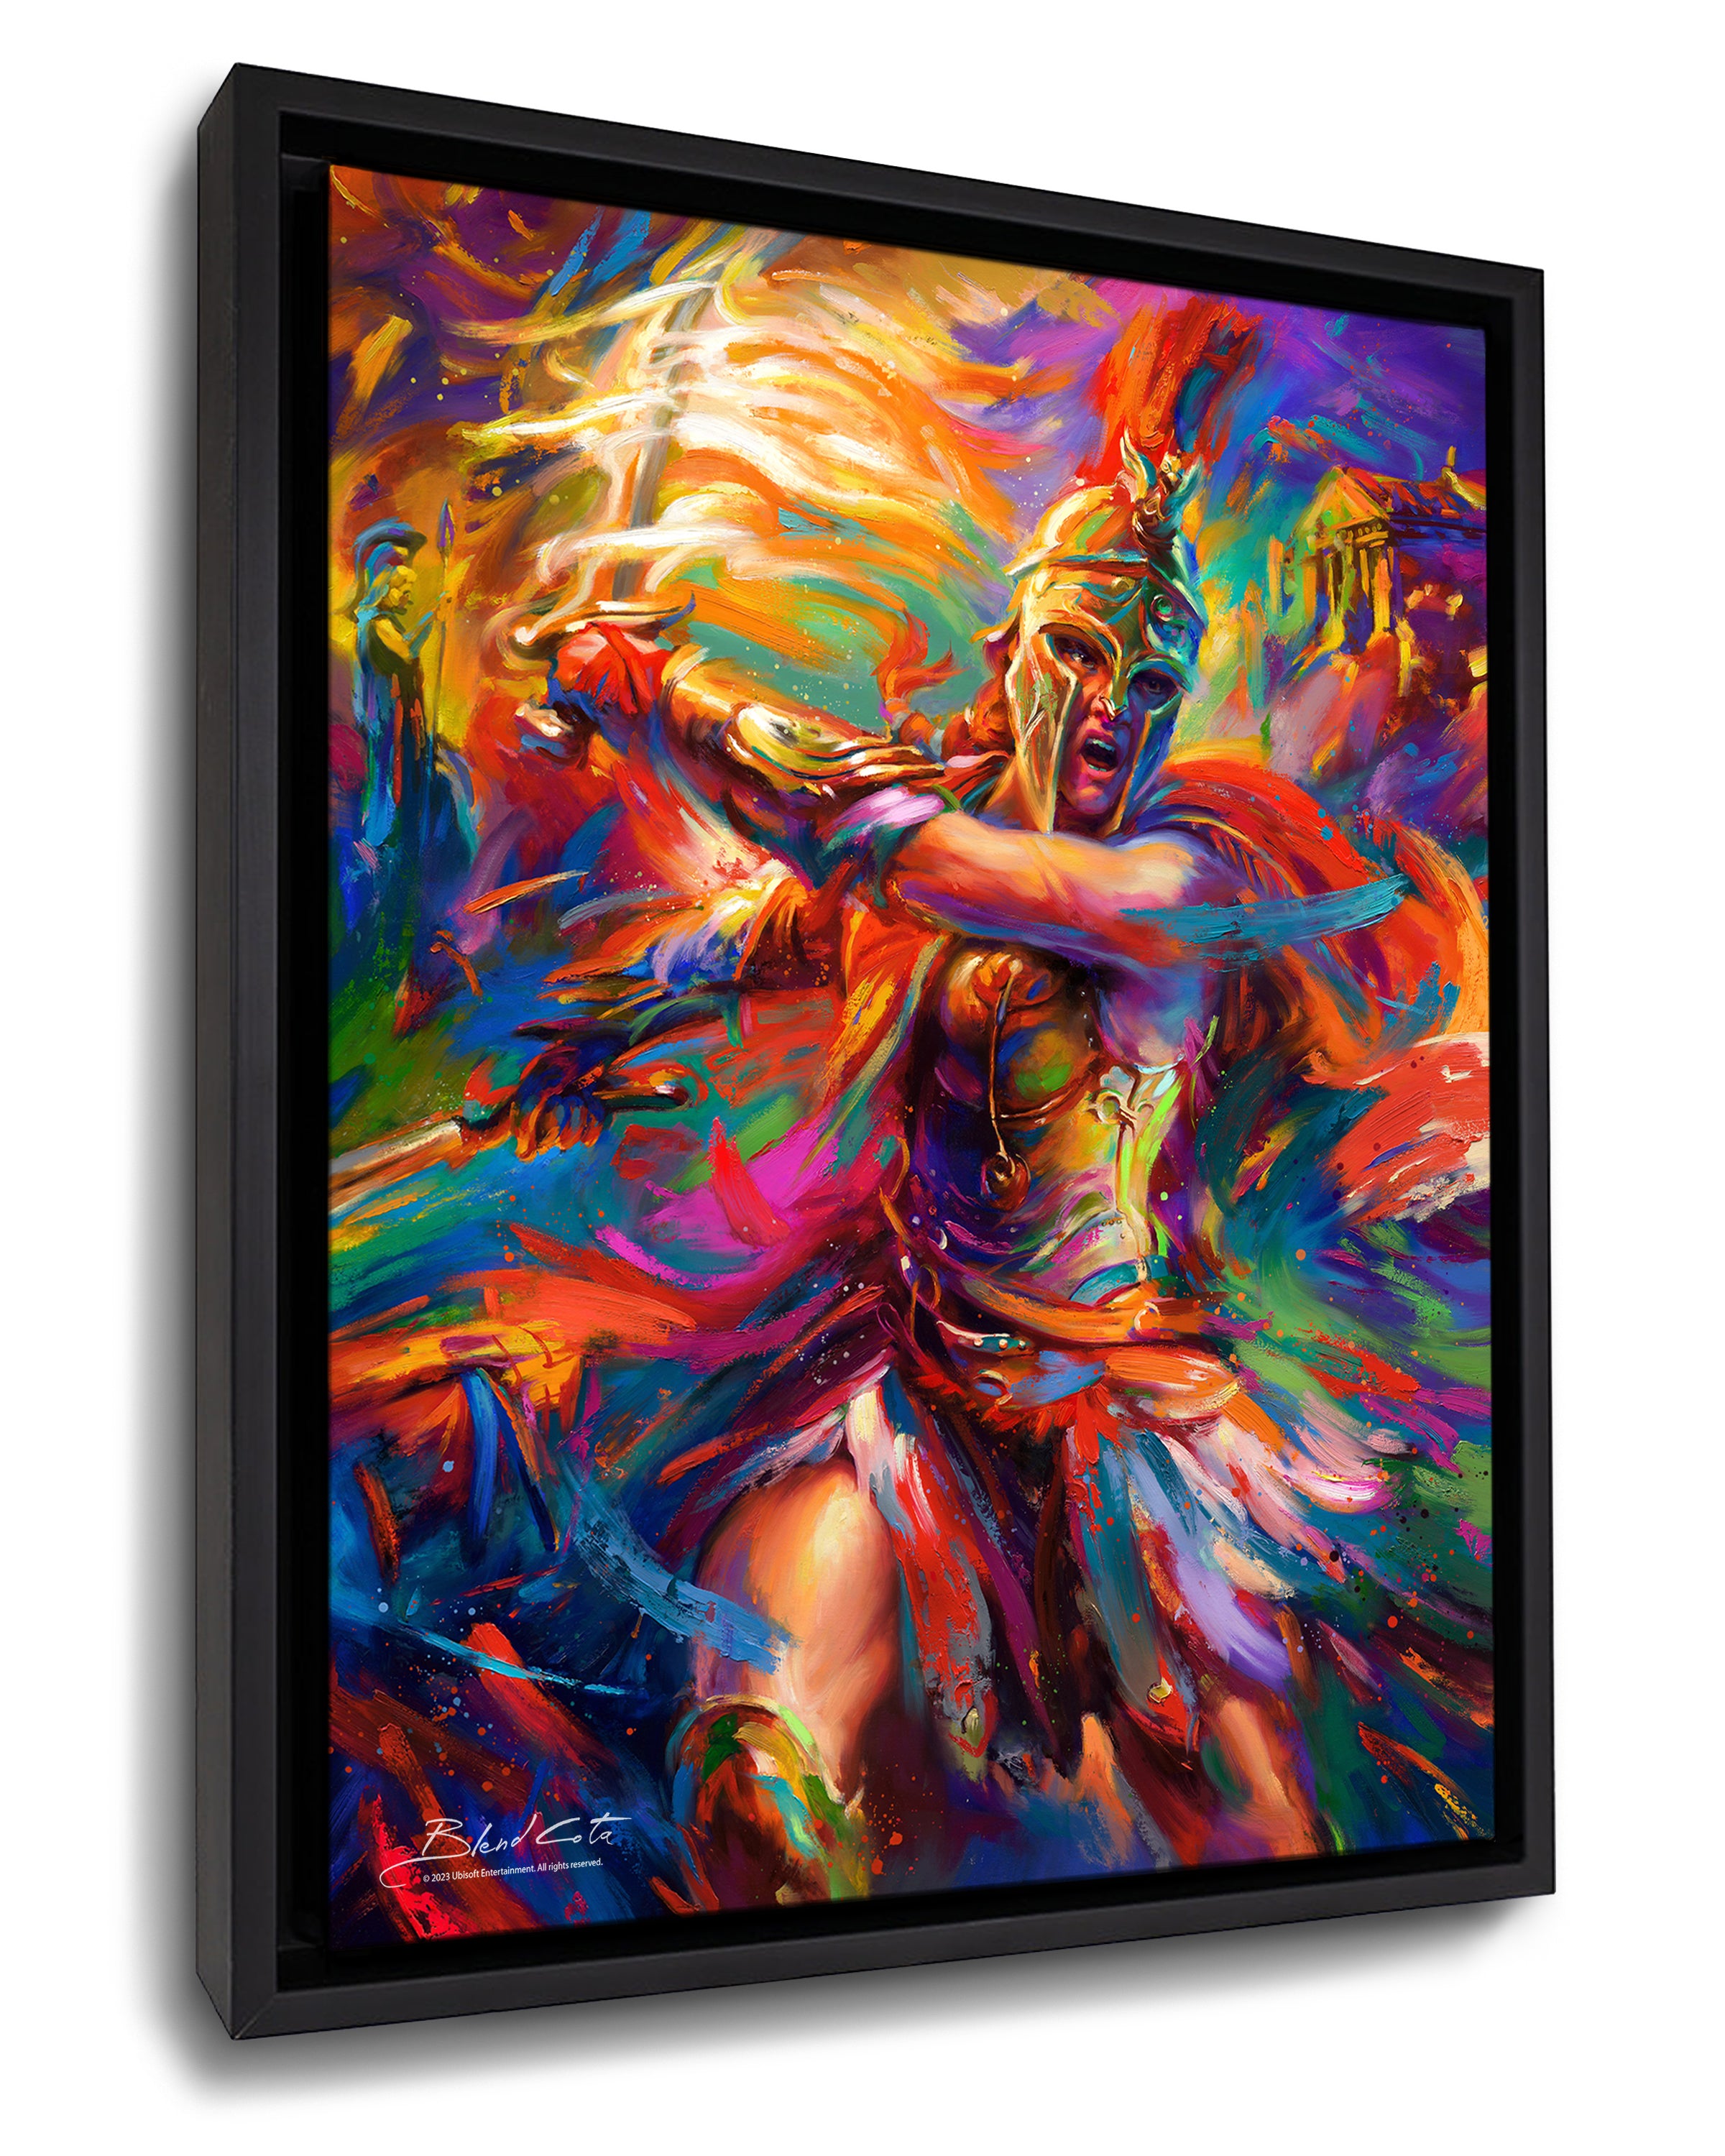 
                  
                    Framed canvas print of Assassin's Creed Kassandra of Odyssey bursting forth with energy and painted with colorful brushstrokes in an expressionistic style.
                  
                